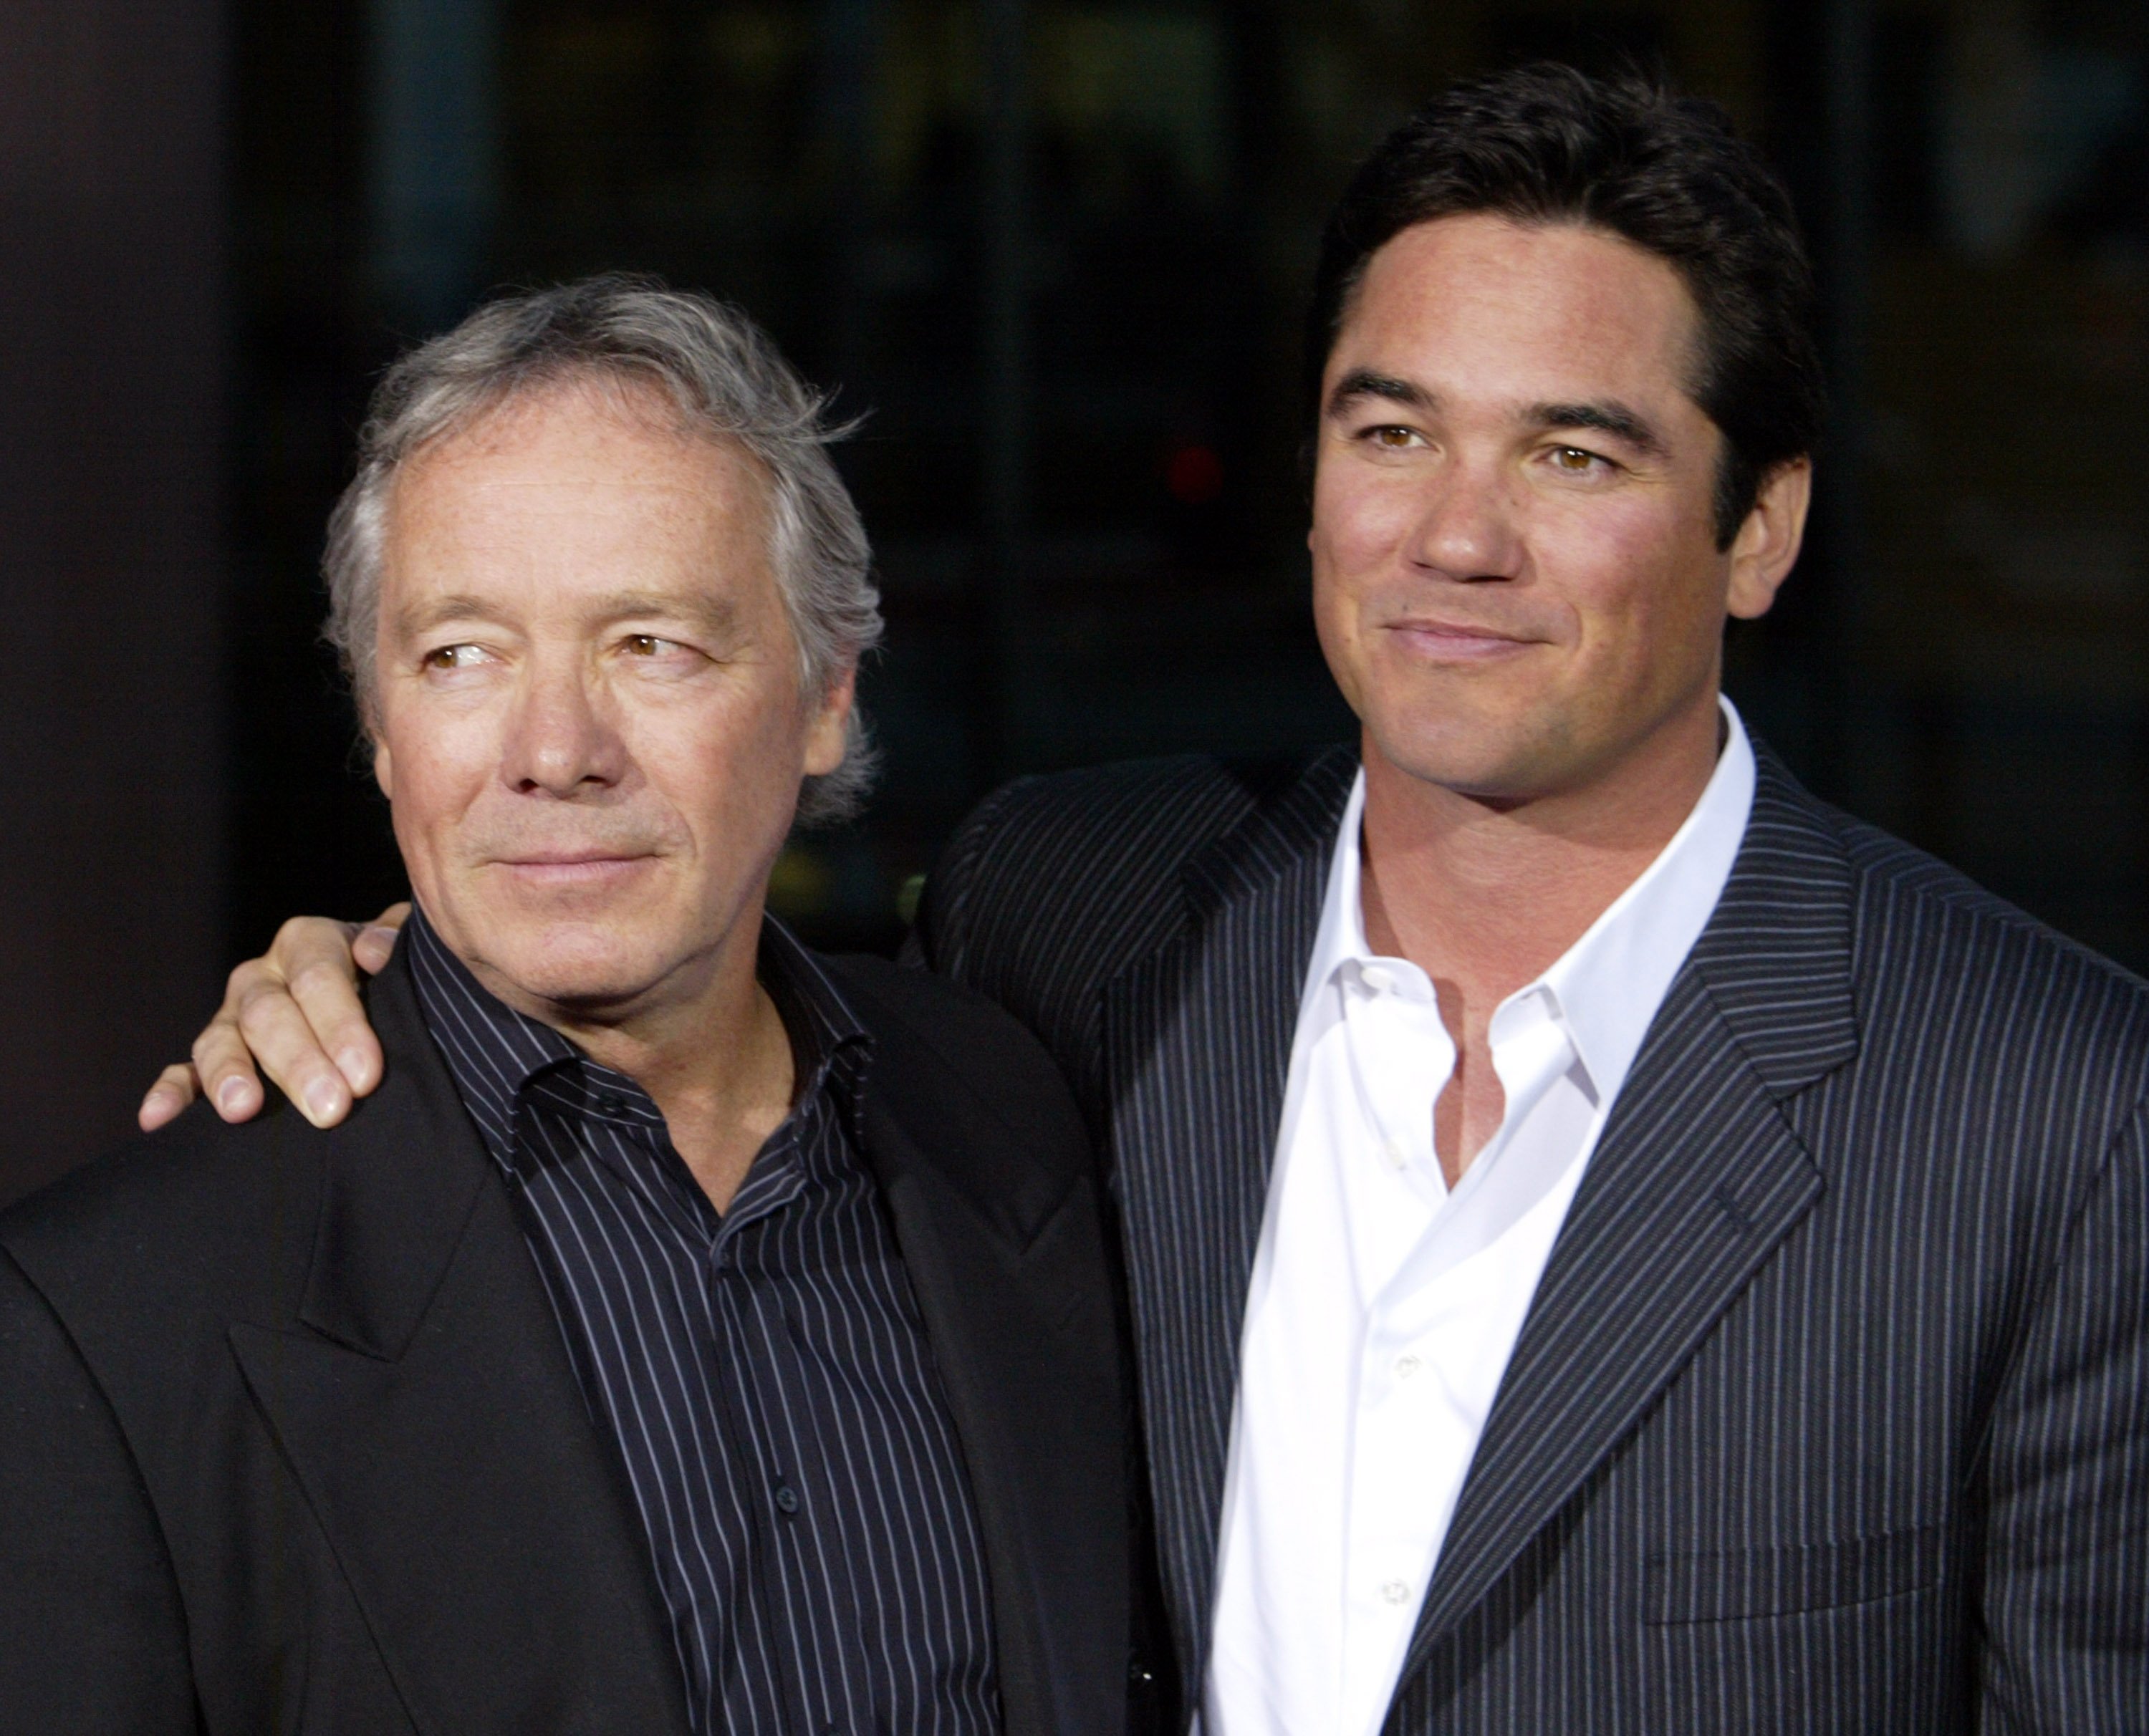 Christopher and Dean Cain during the "September Dawn" Los Angeles screening in Los Angeles, California, on May 2, 2007 | Source: Getty Images